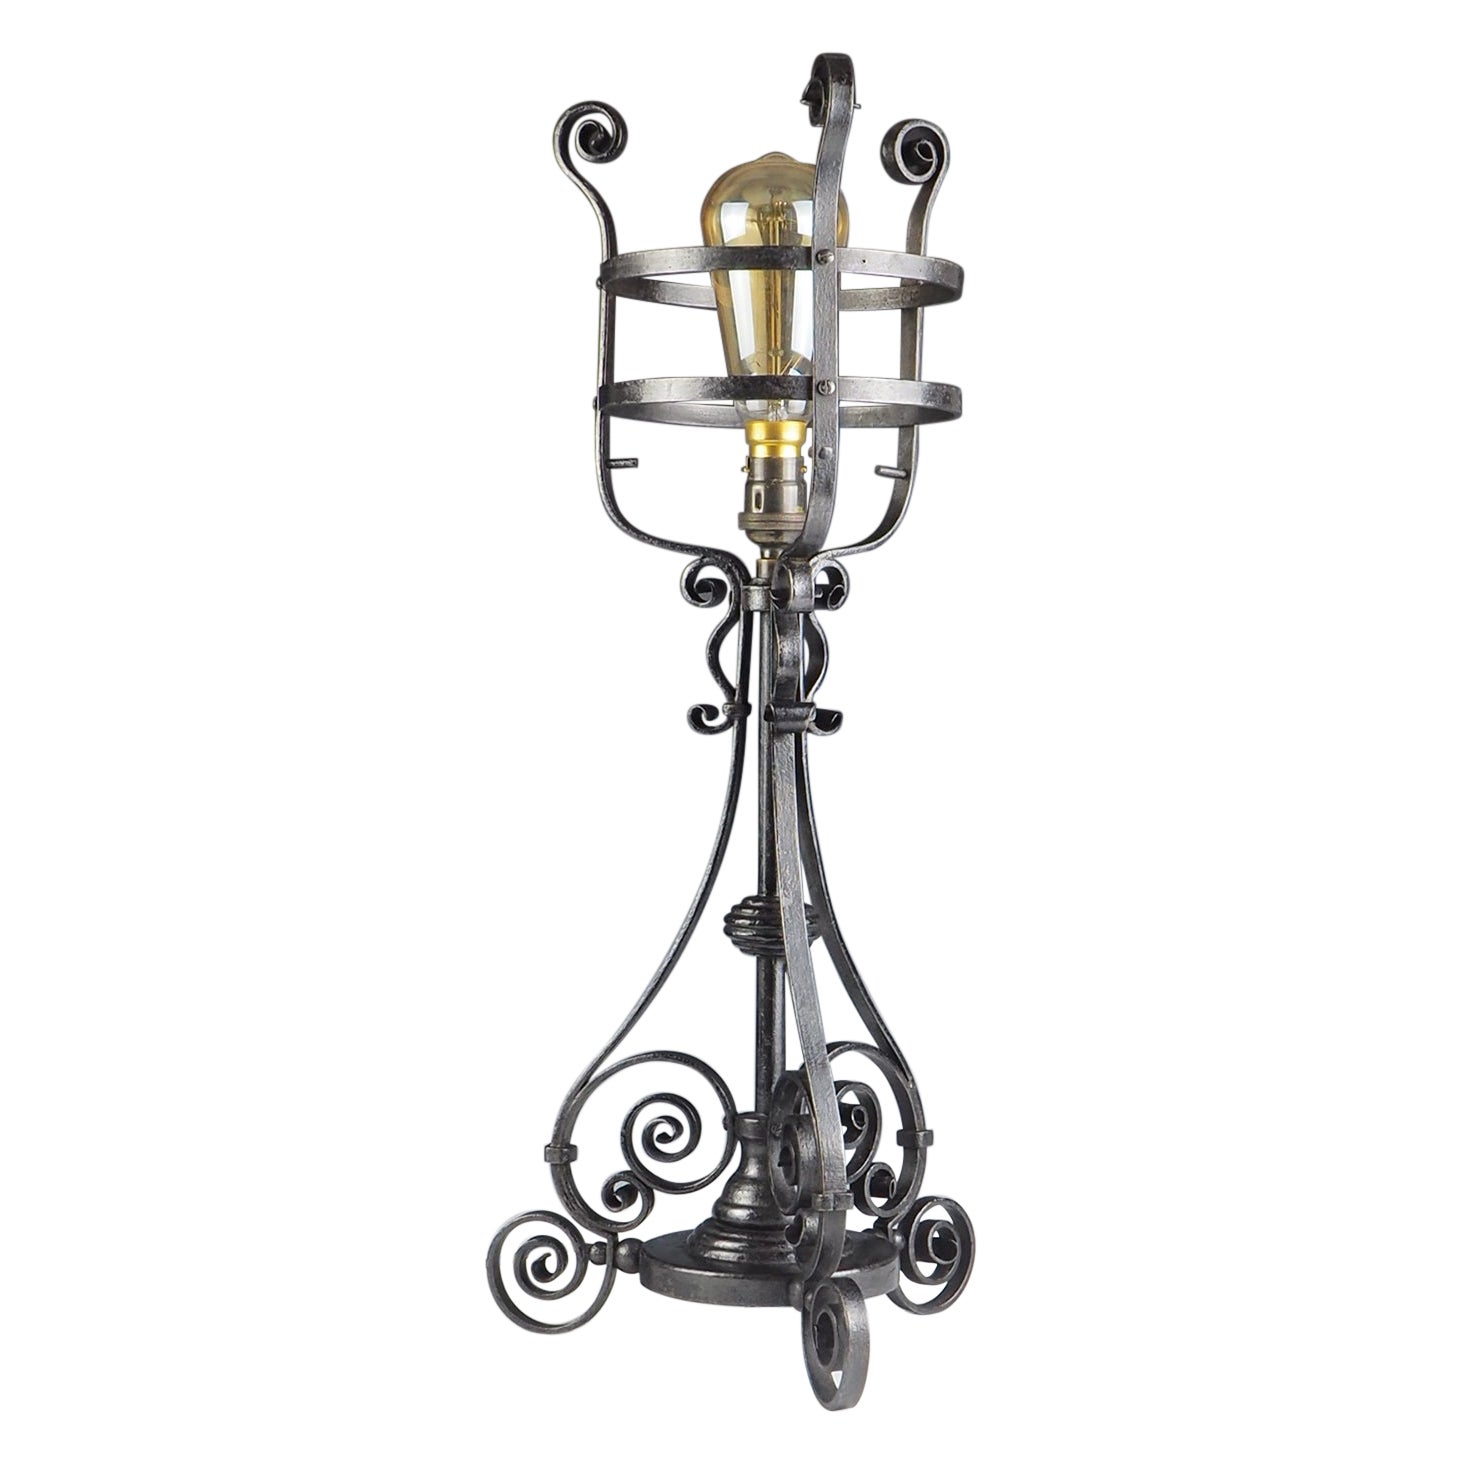 Arts & Crafts Hand Fordged Wrought Iron Table Lamp